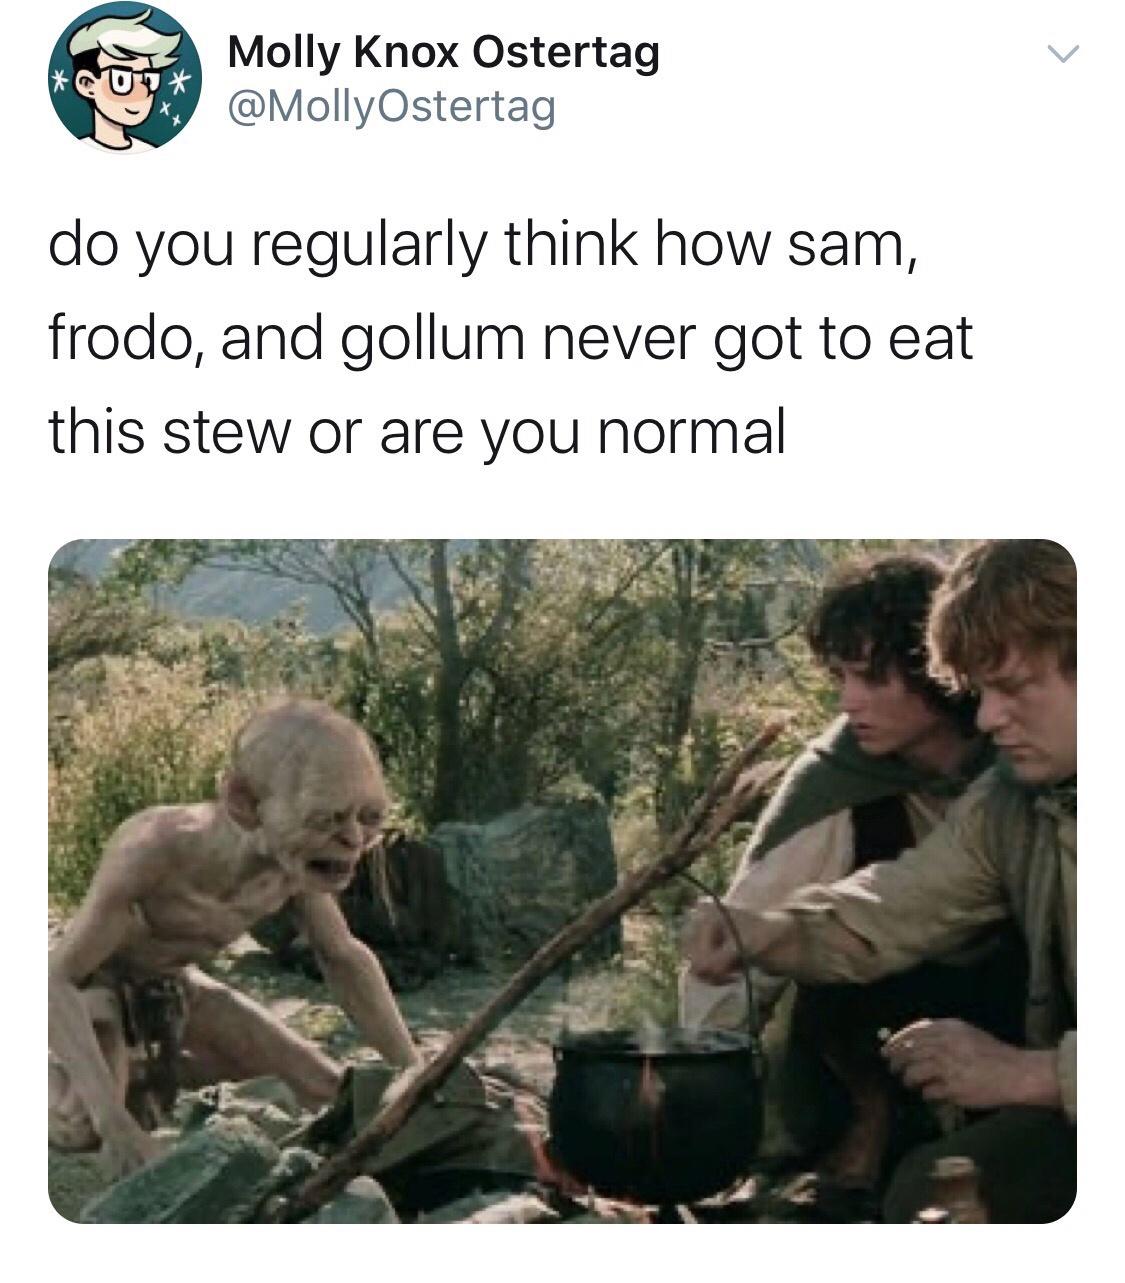 lord of the rings cooking - Molly Knox Ostertag do you regularly think how sam, frodo, and gollum never got to eat this stew or are you normal